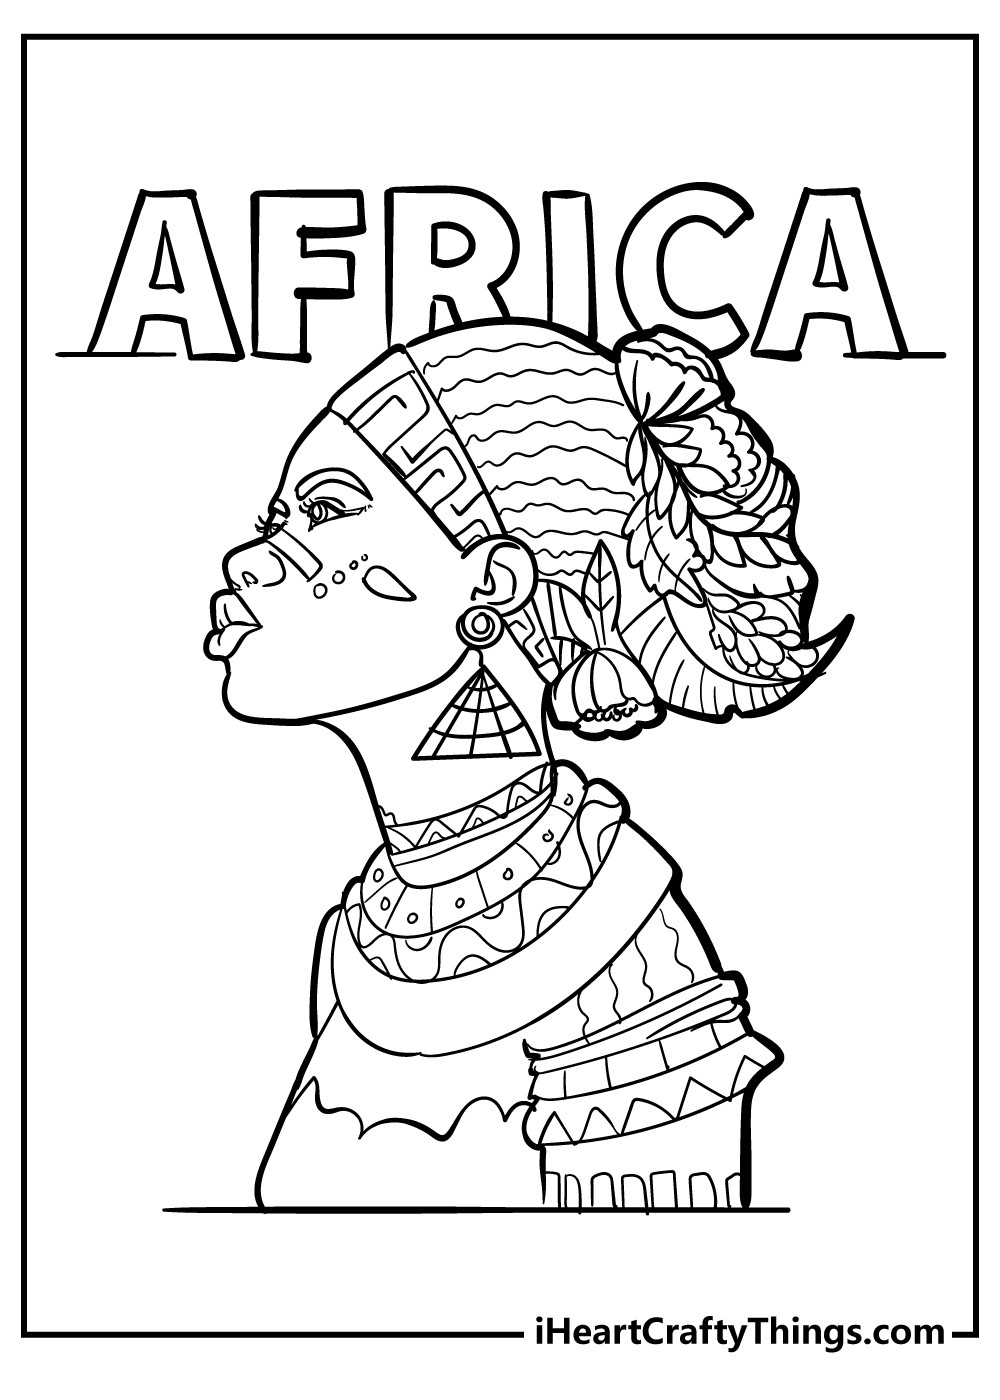 Africa Coloring Pages free pdf download